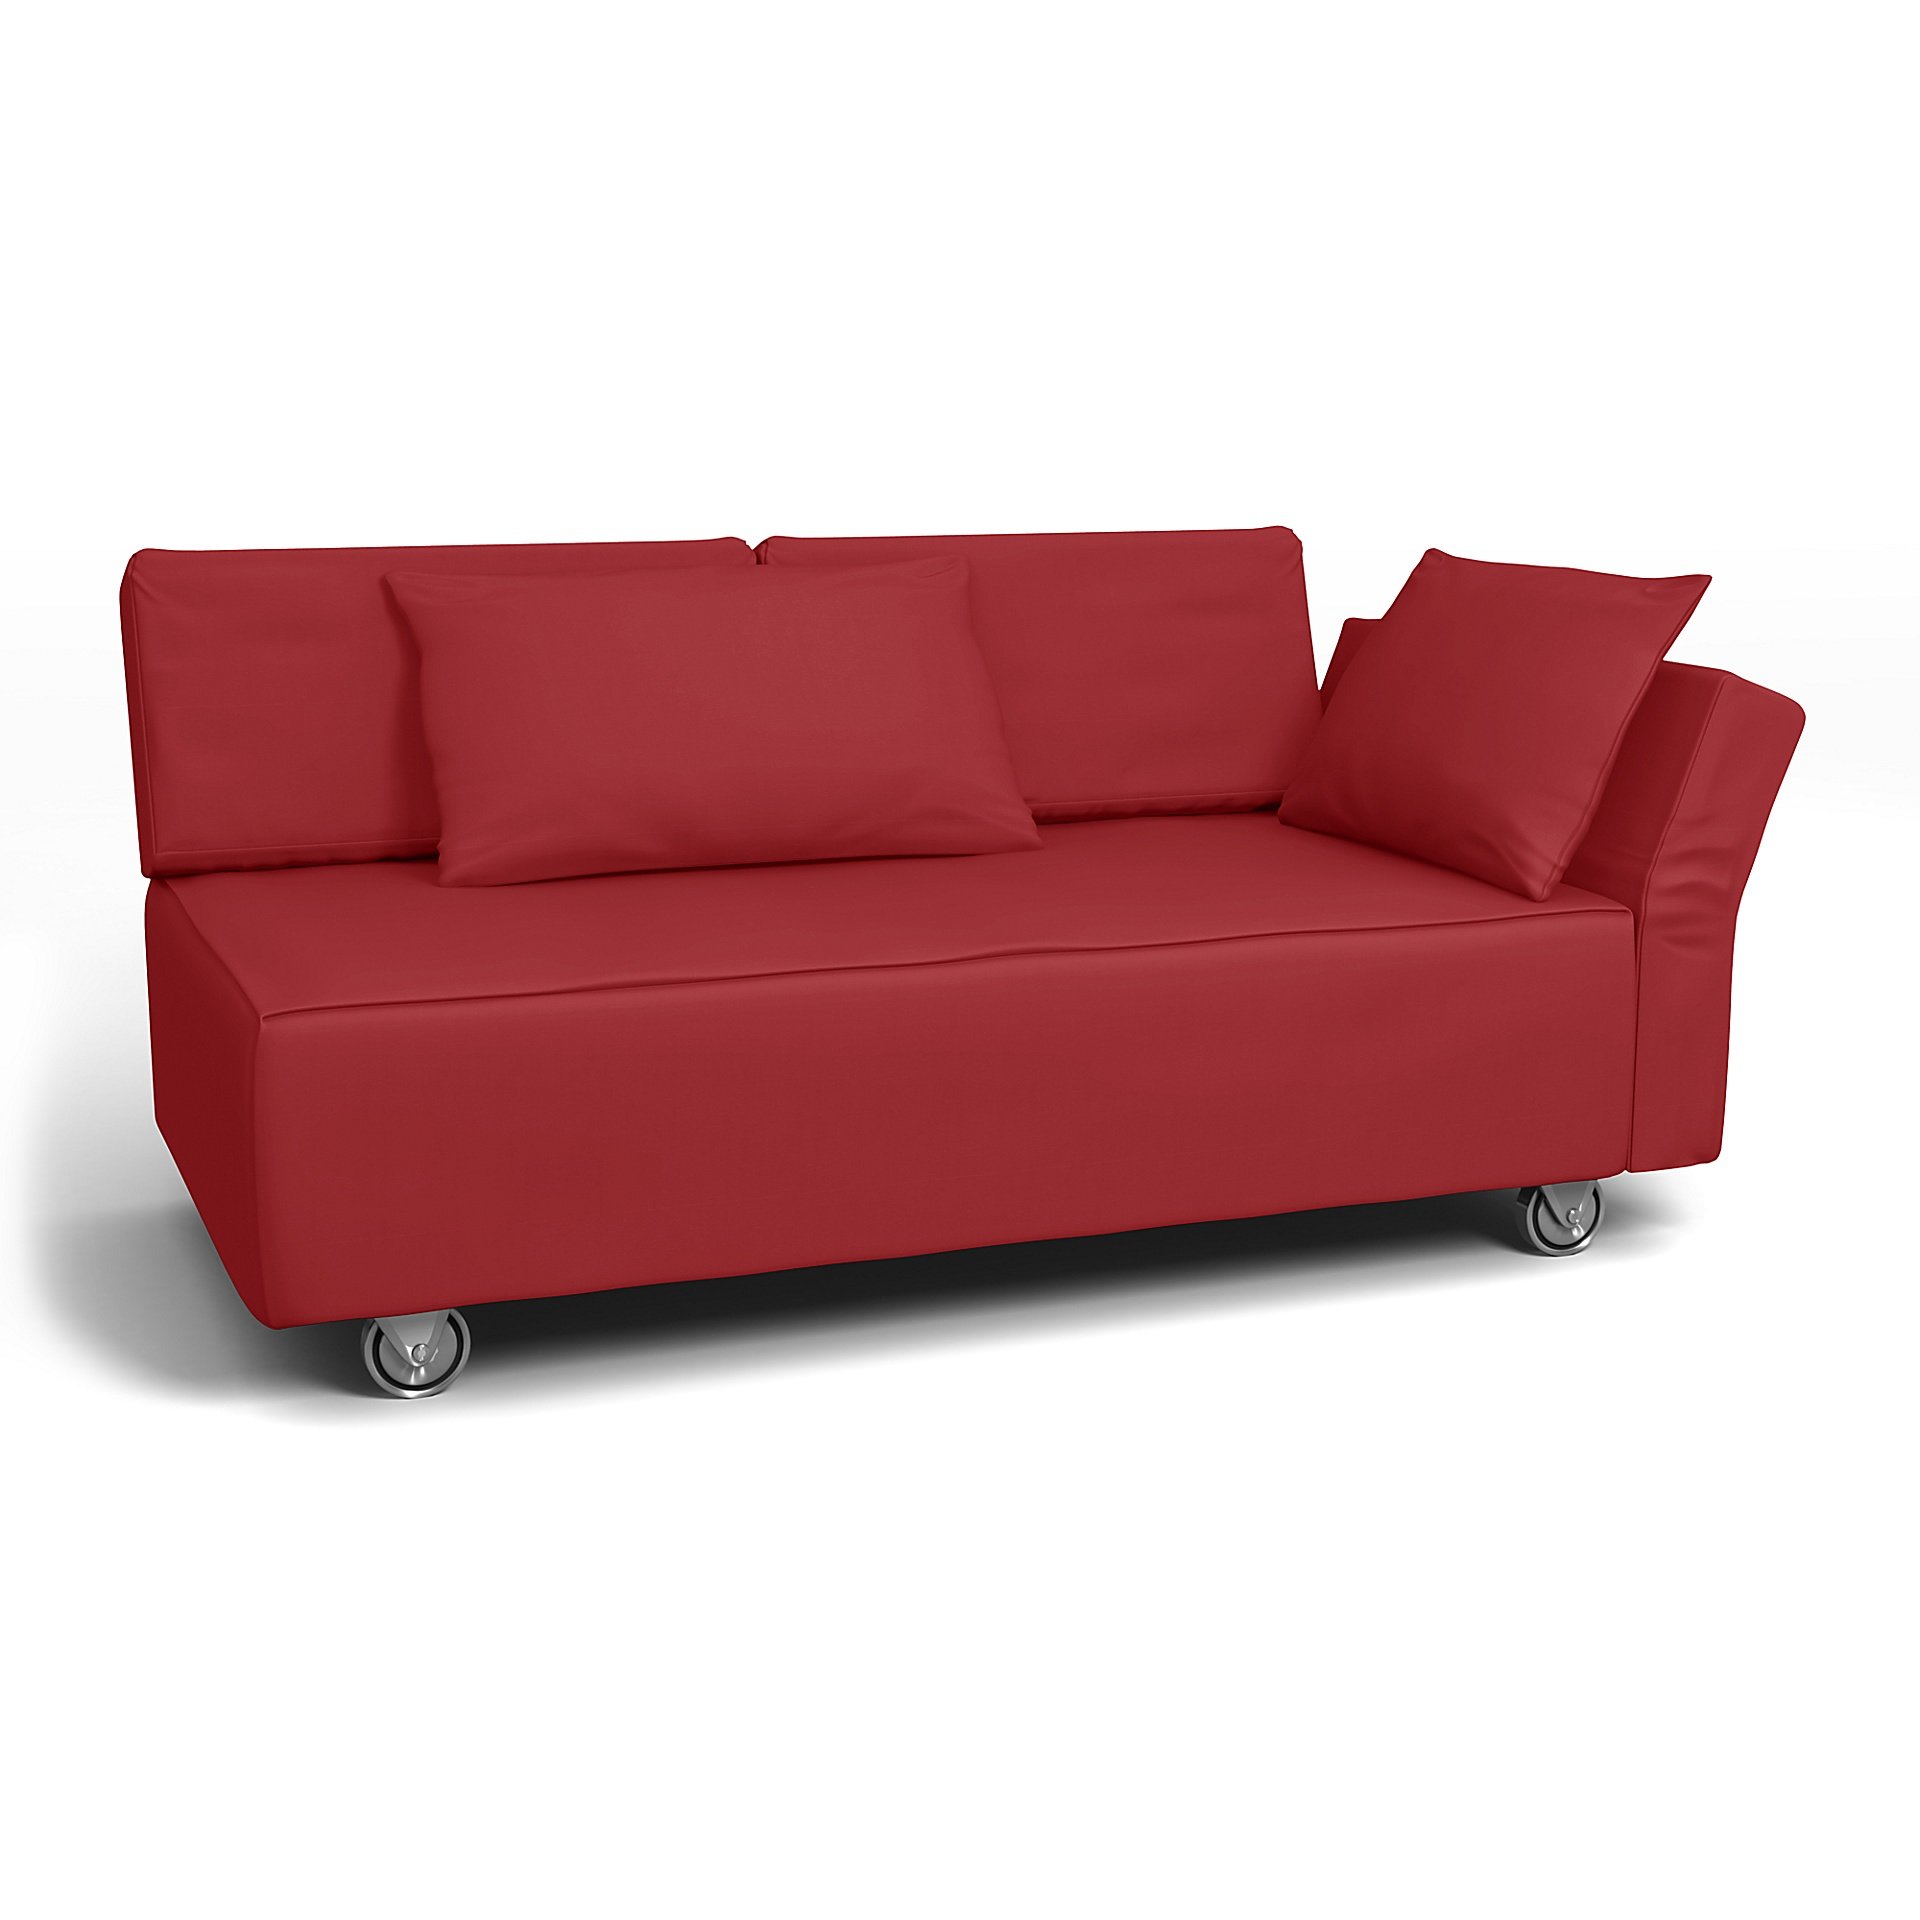 IKEA - Falsterbo 2 Seat Sofa with Right Arm Cover, Scarlet Red, Cotton - Bemz